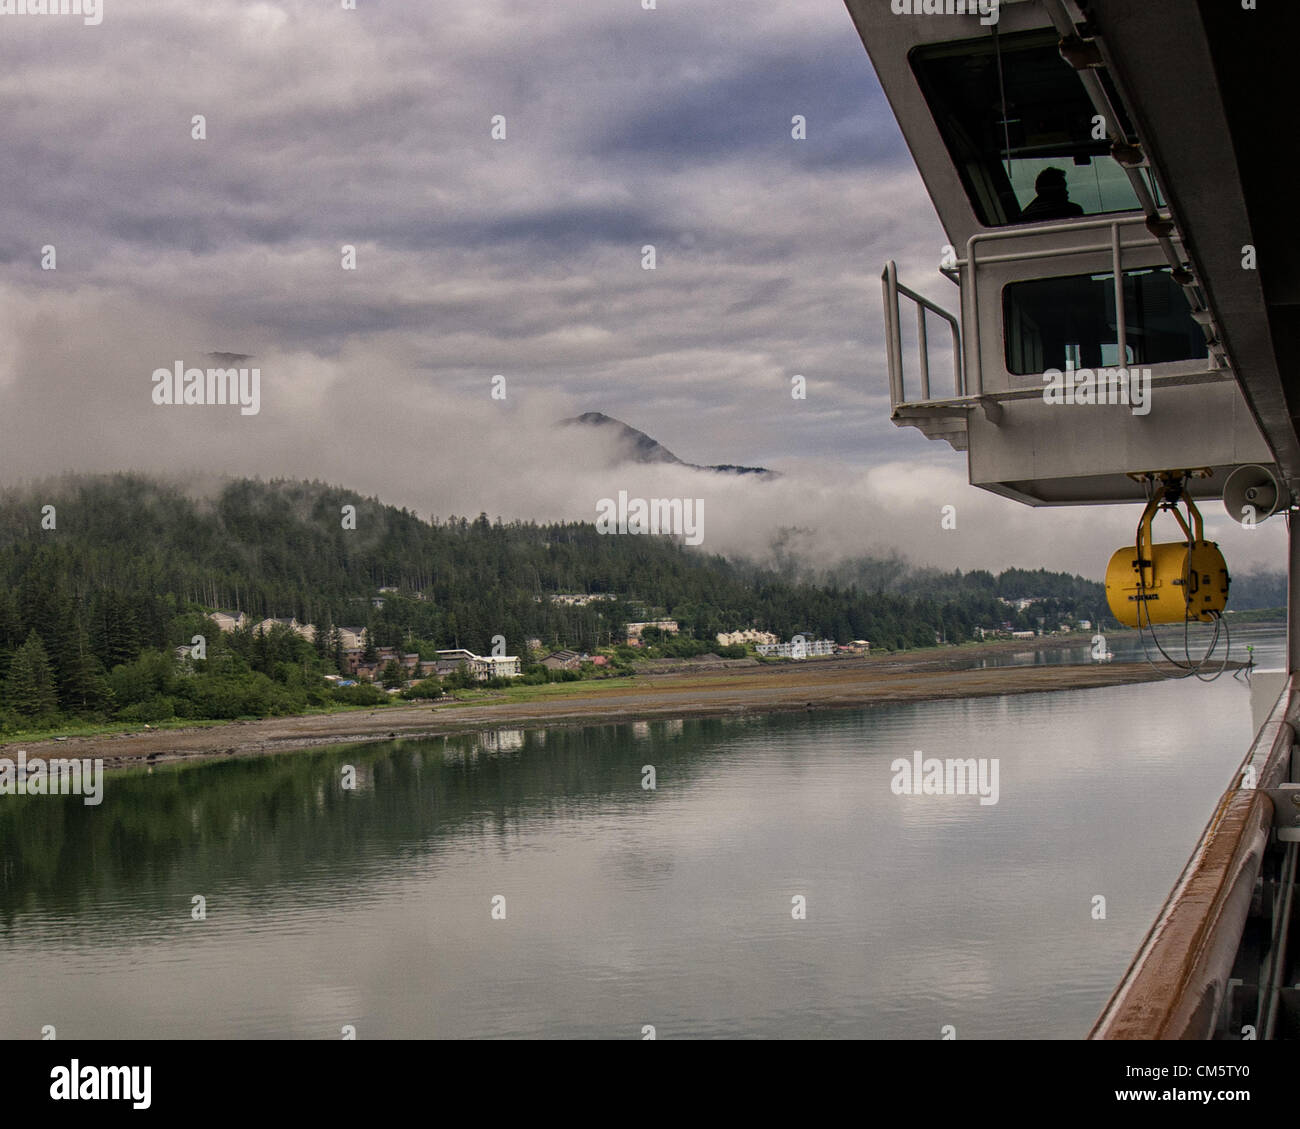 July 5, 2012 - Borough Of Juneau, Alaska, US - A pilot on the flying bridge steers the Holland America Lines ms Zaandam up the Gastineau Channel as low lying clouds and morning mist hang over the town of Douglas on Douglas Island, just across the channel from Juneau, obscuring the mountains of the Coast Range. (Credit Image: © Arnold Drapkin/ZUMAPRESS.com) Stock Photo